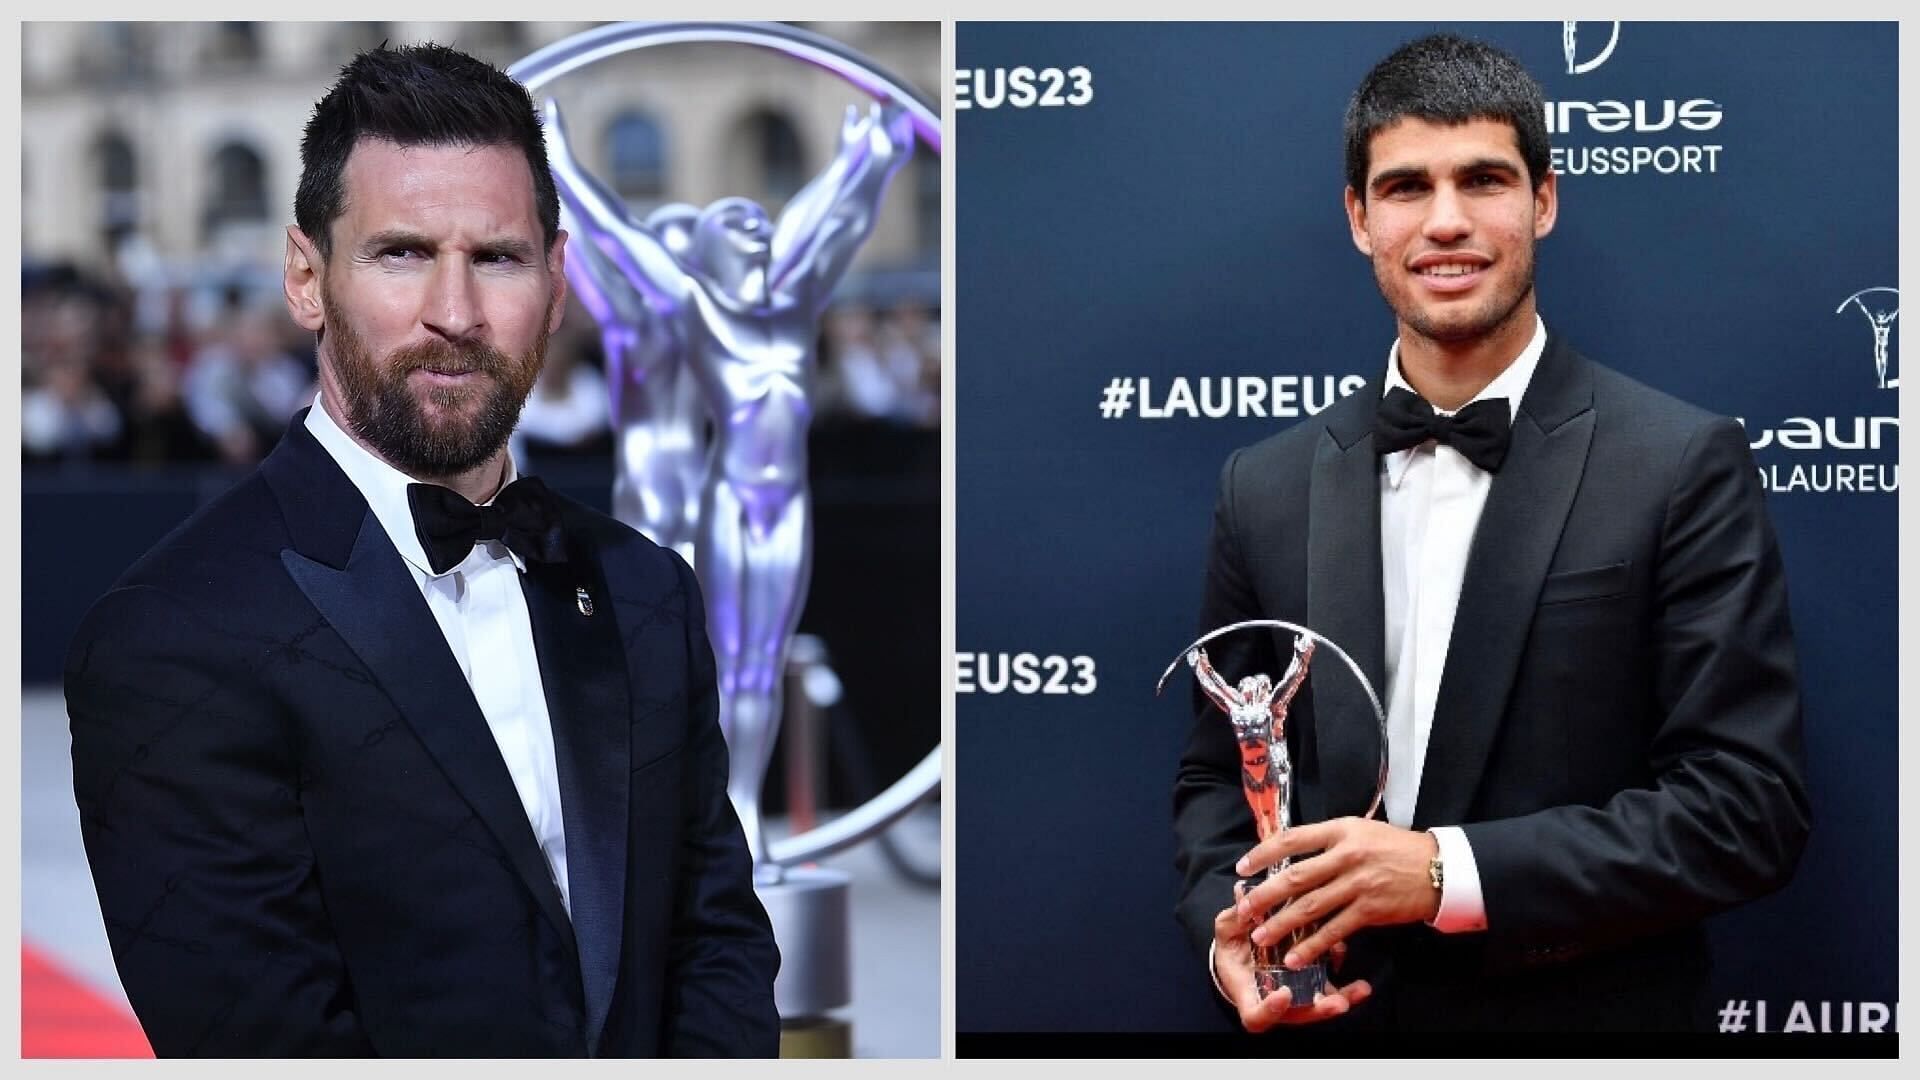 Laureus award winners Carlos Alcaraz and Lionel Messi cross paths on the red carpet